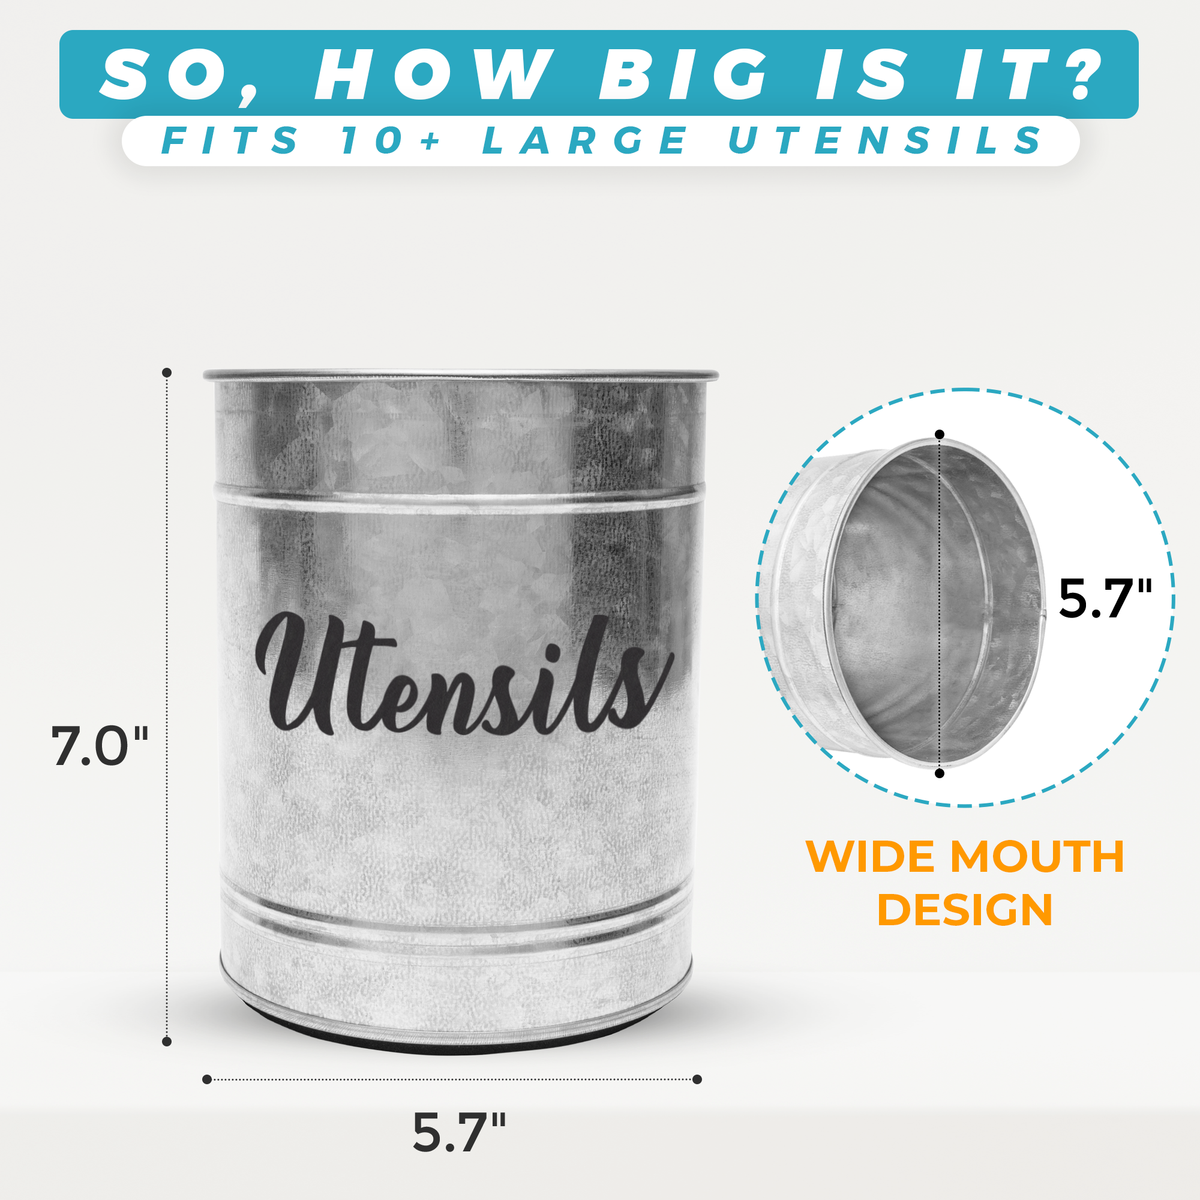 Wide mouth design on 5.7 x 5.7 x 7 inch utensil holder